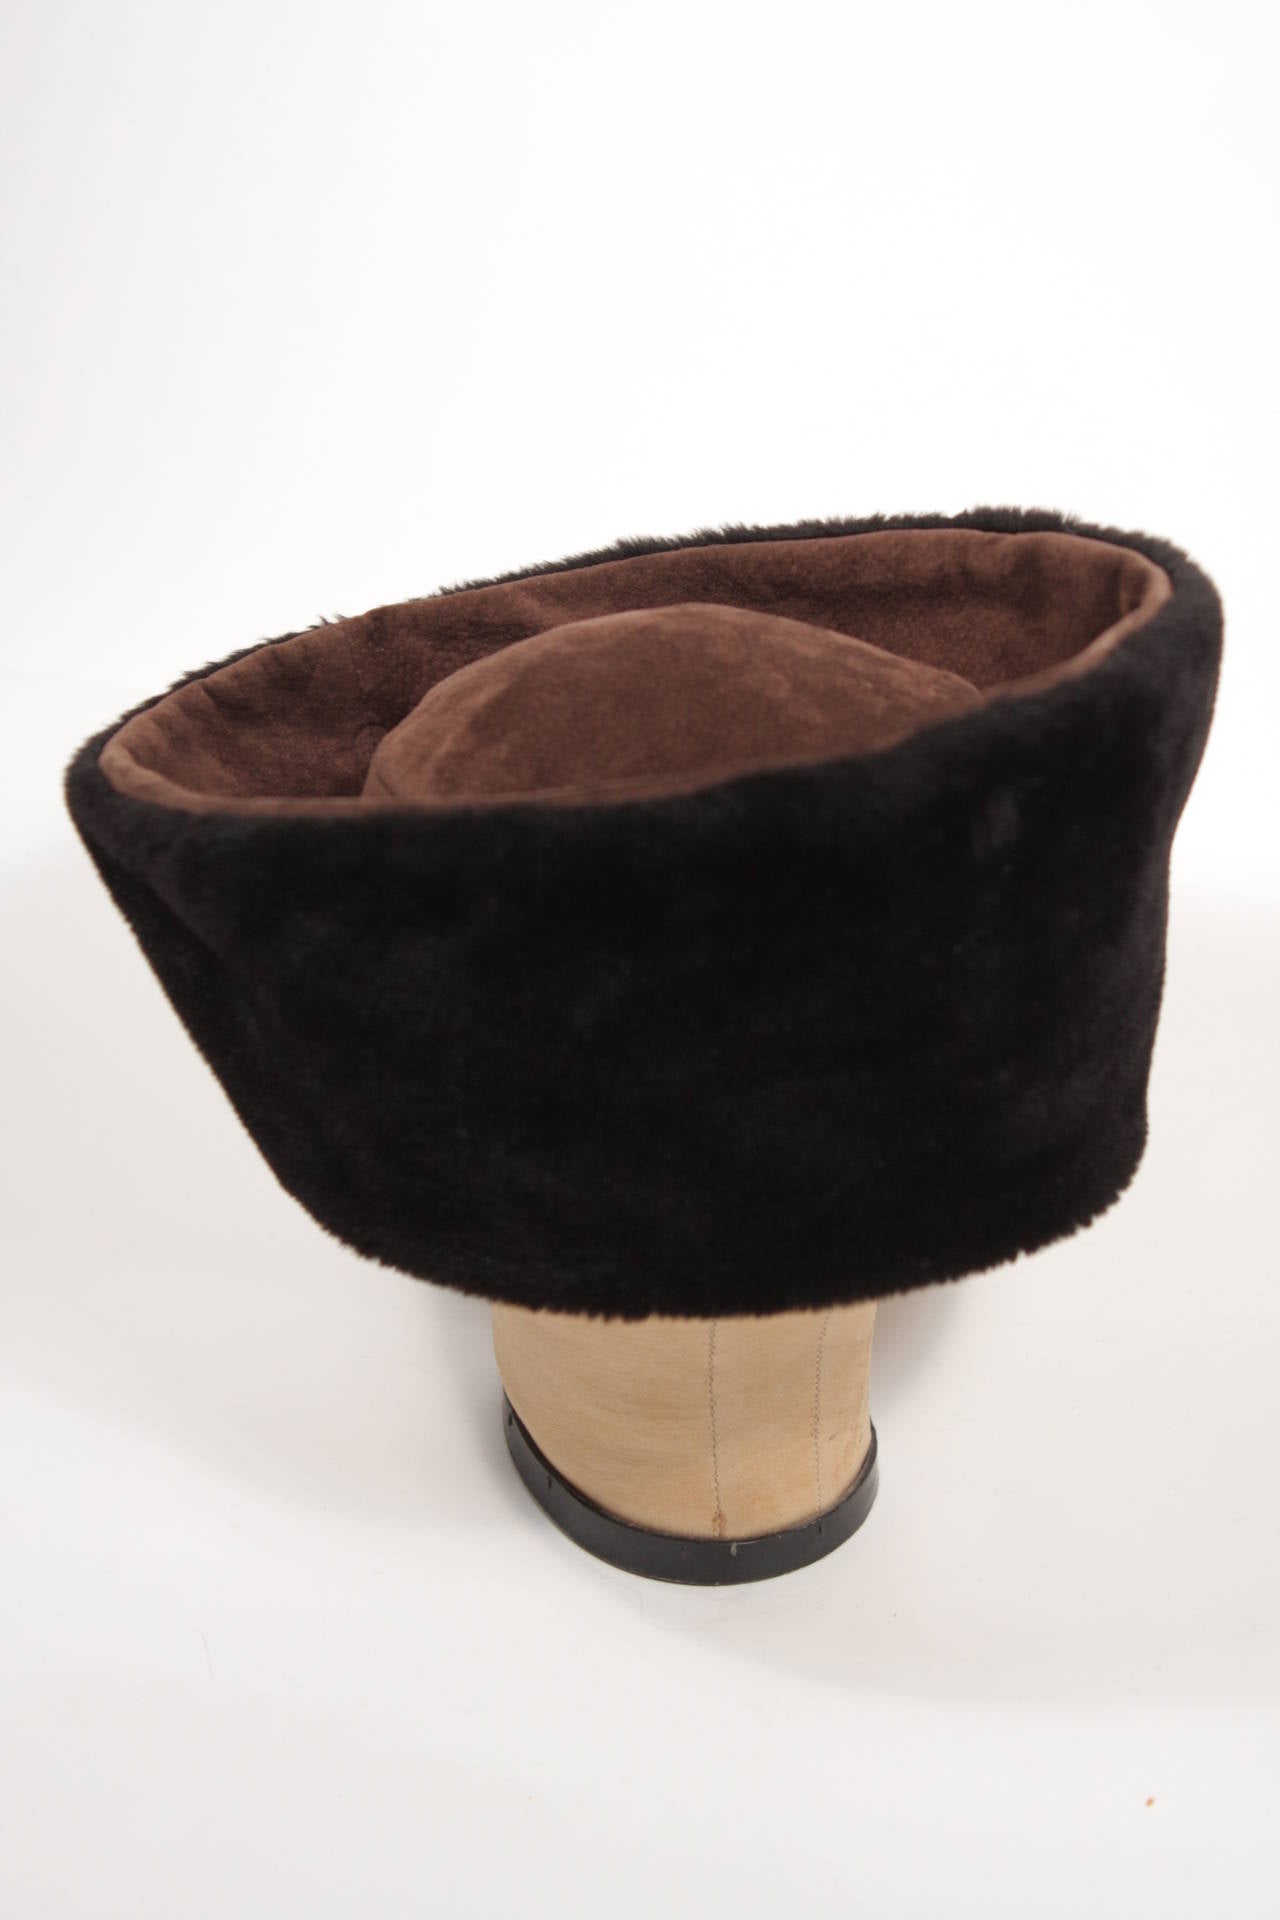 Women's Yves Saint Laurent Brown Suede Hat with Black Sherling Interior